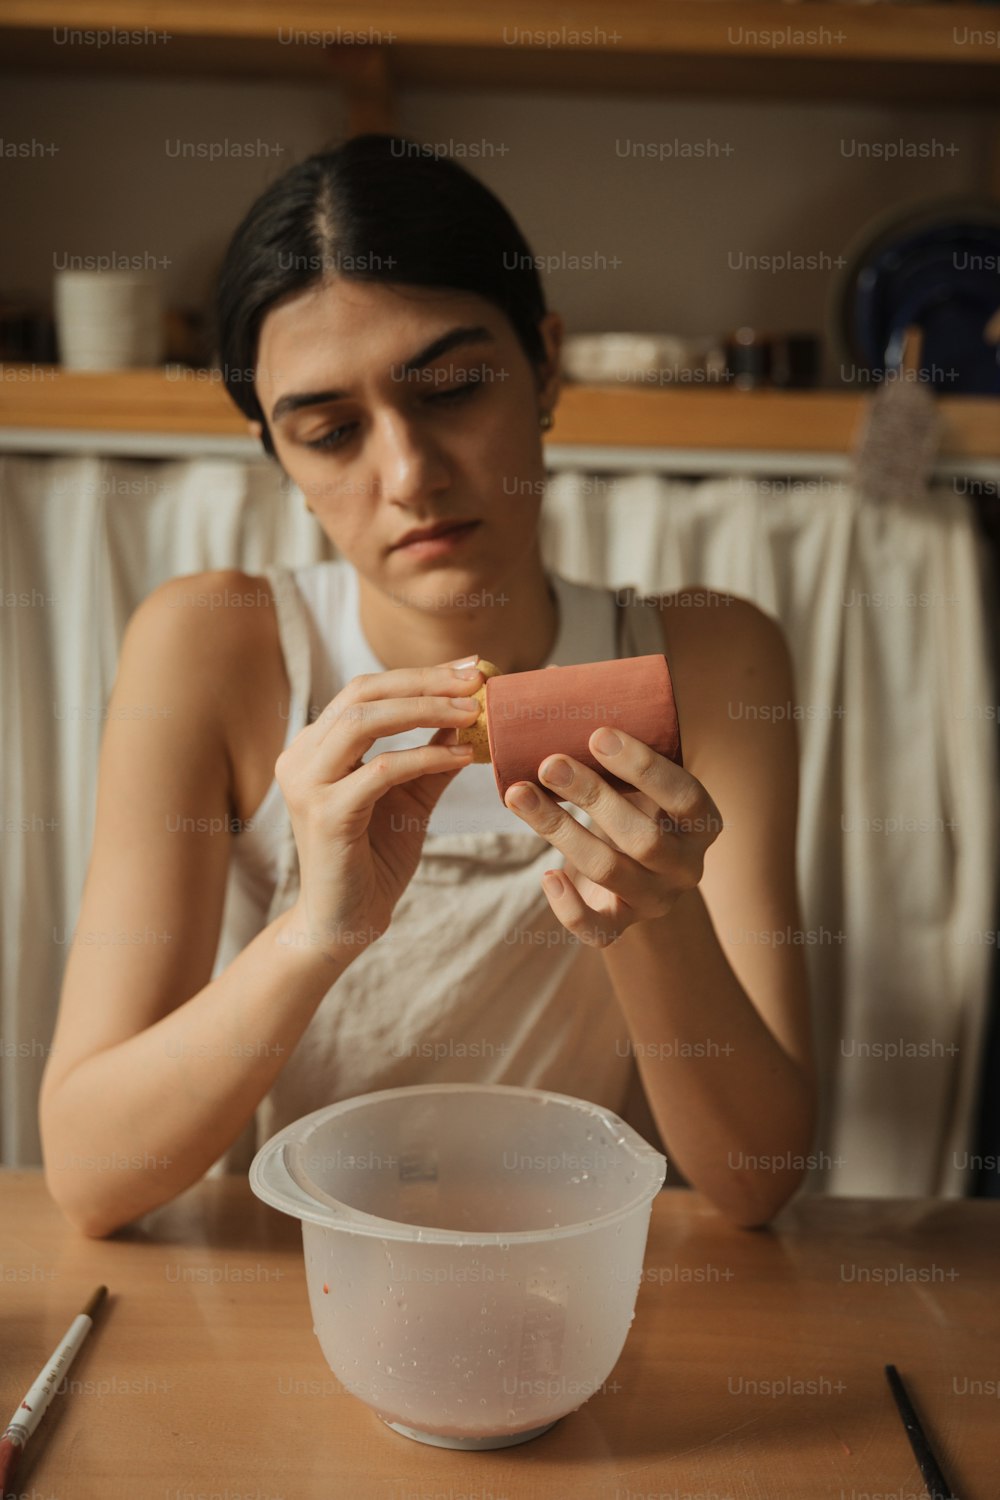 a woman sitting at a table holding a piece of food